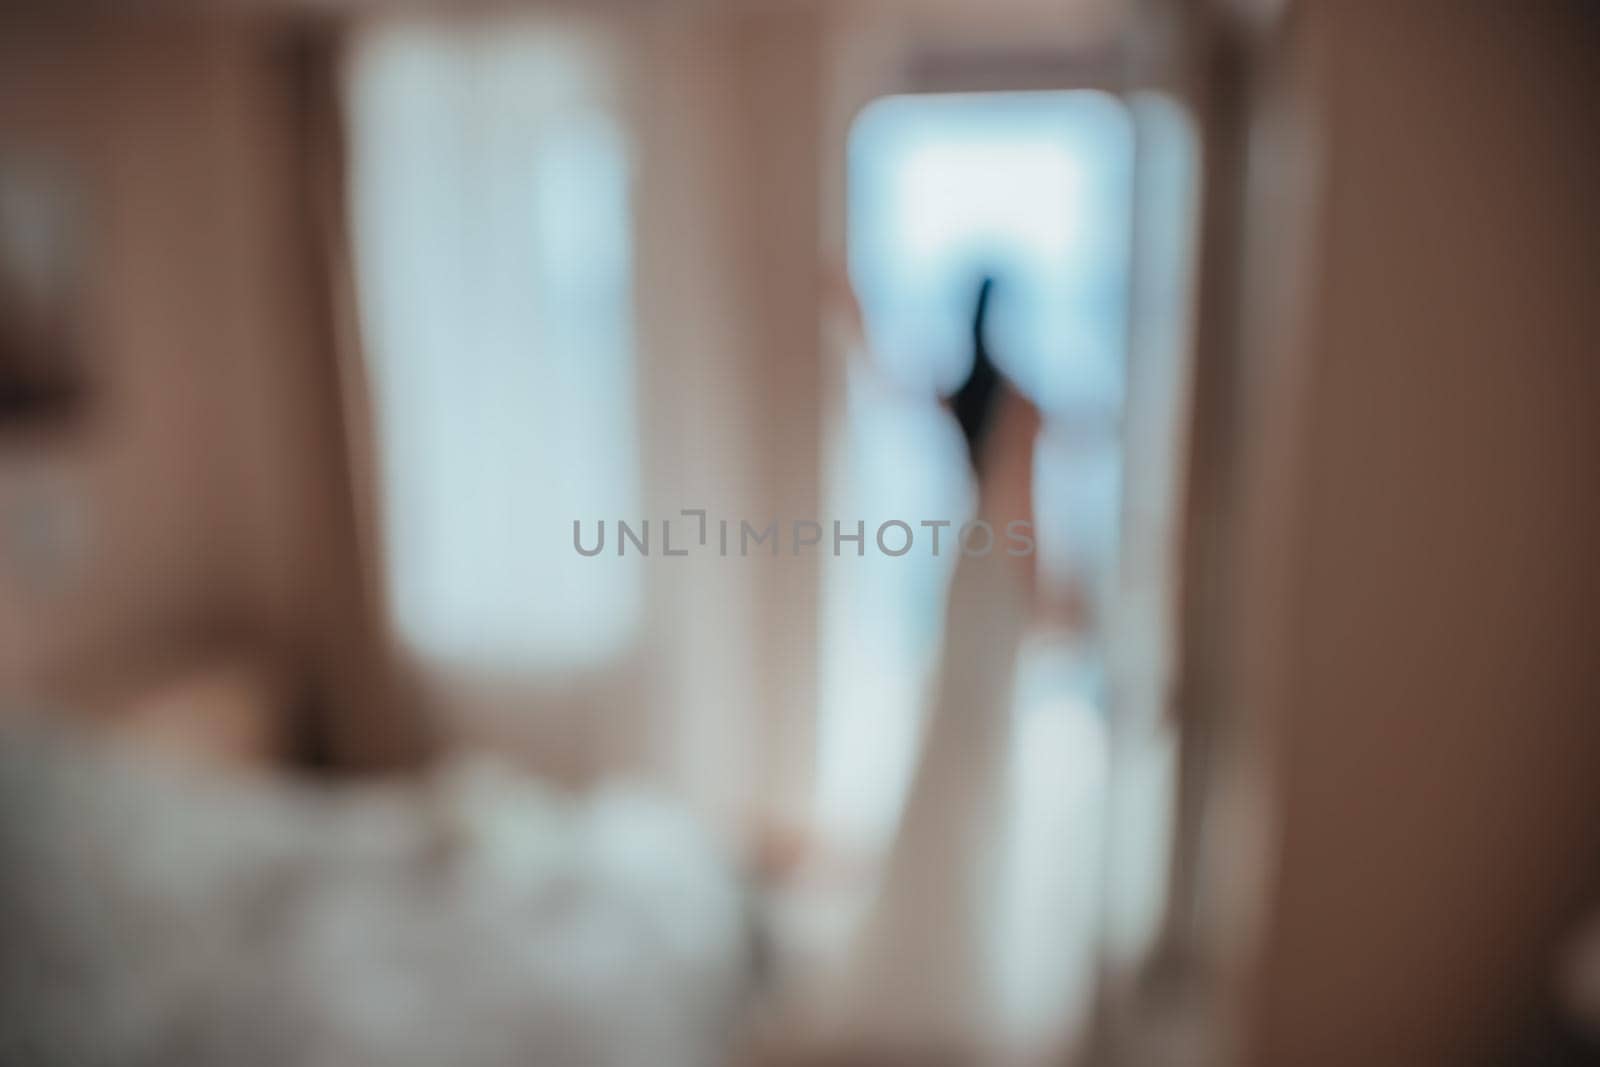 Blurred image for the background. Back view of beautiful brunette bride young woman in the white lace dress near window in the hotel room. Wedding concept